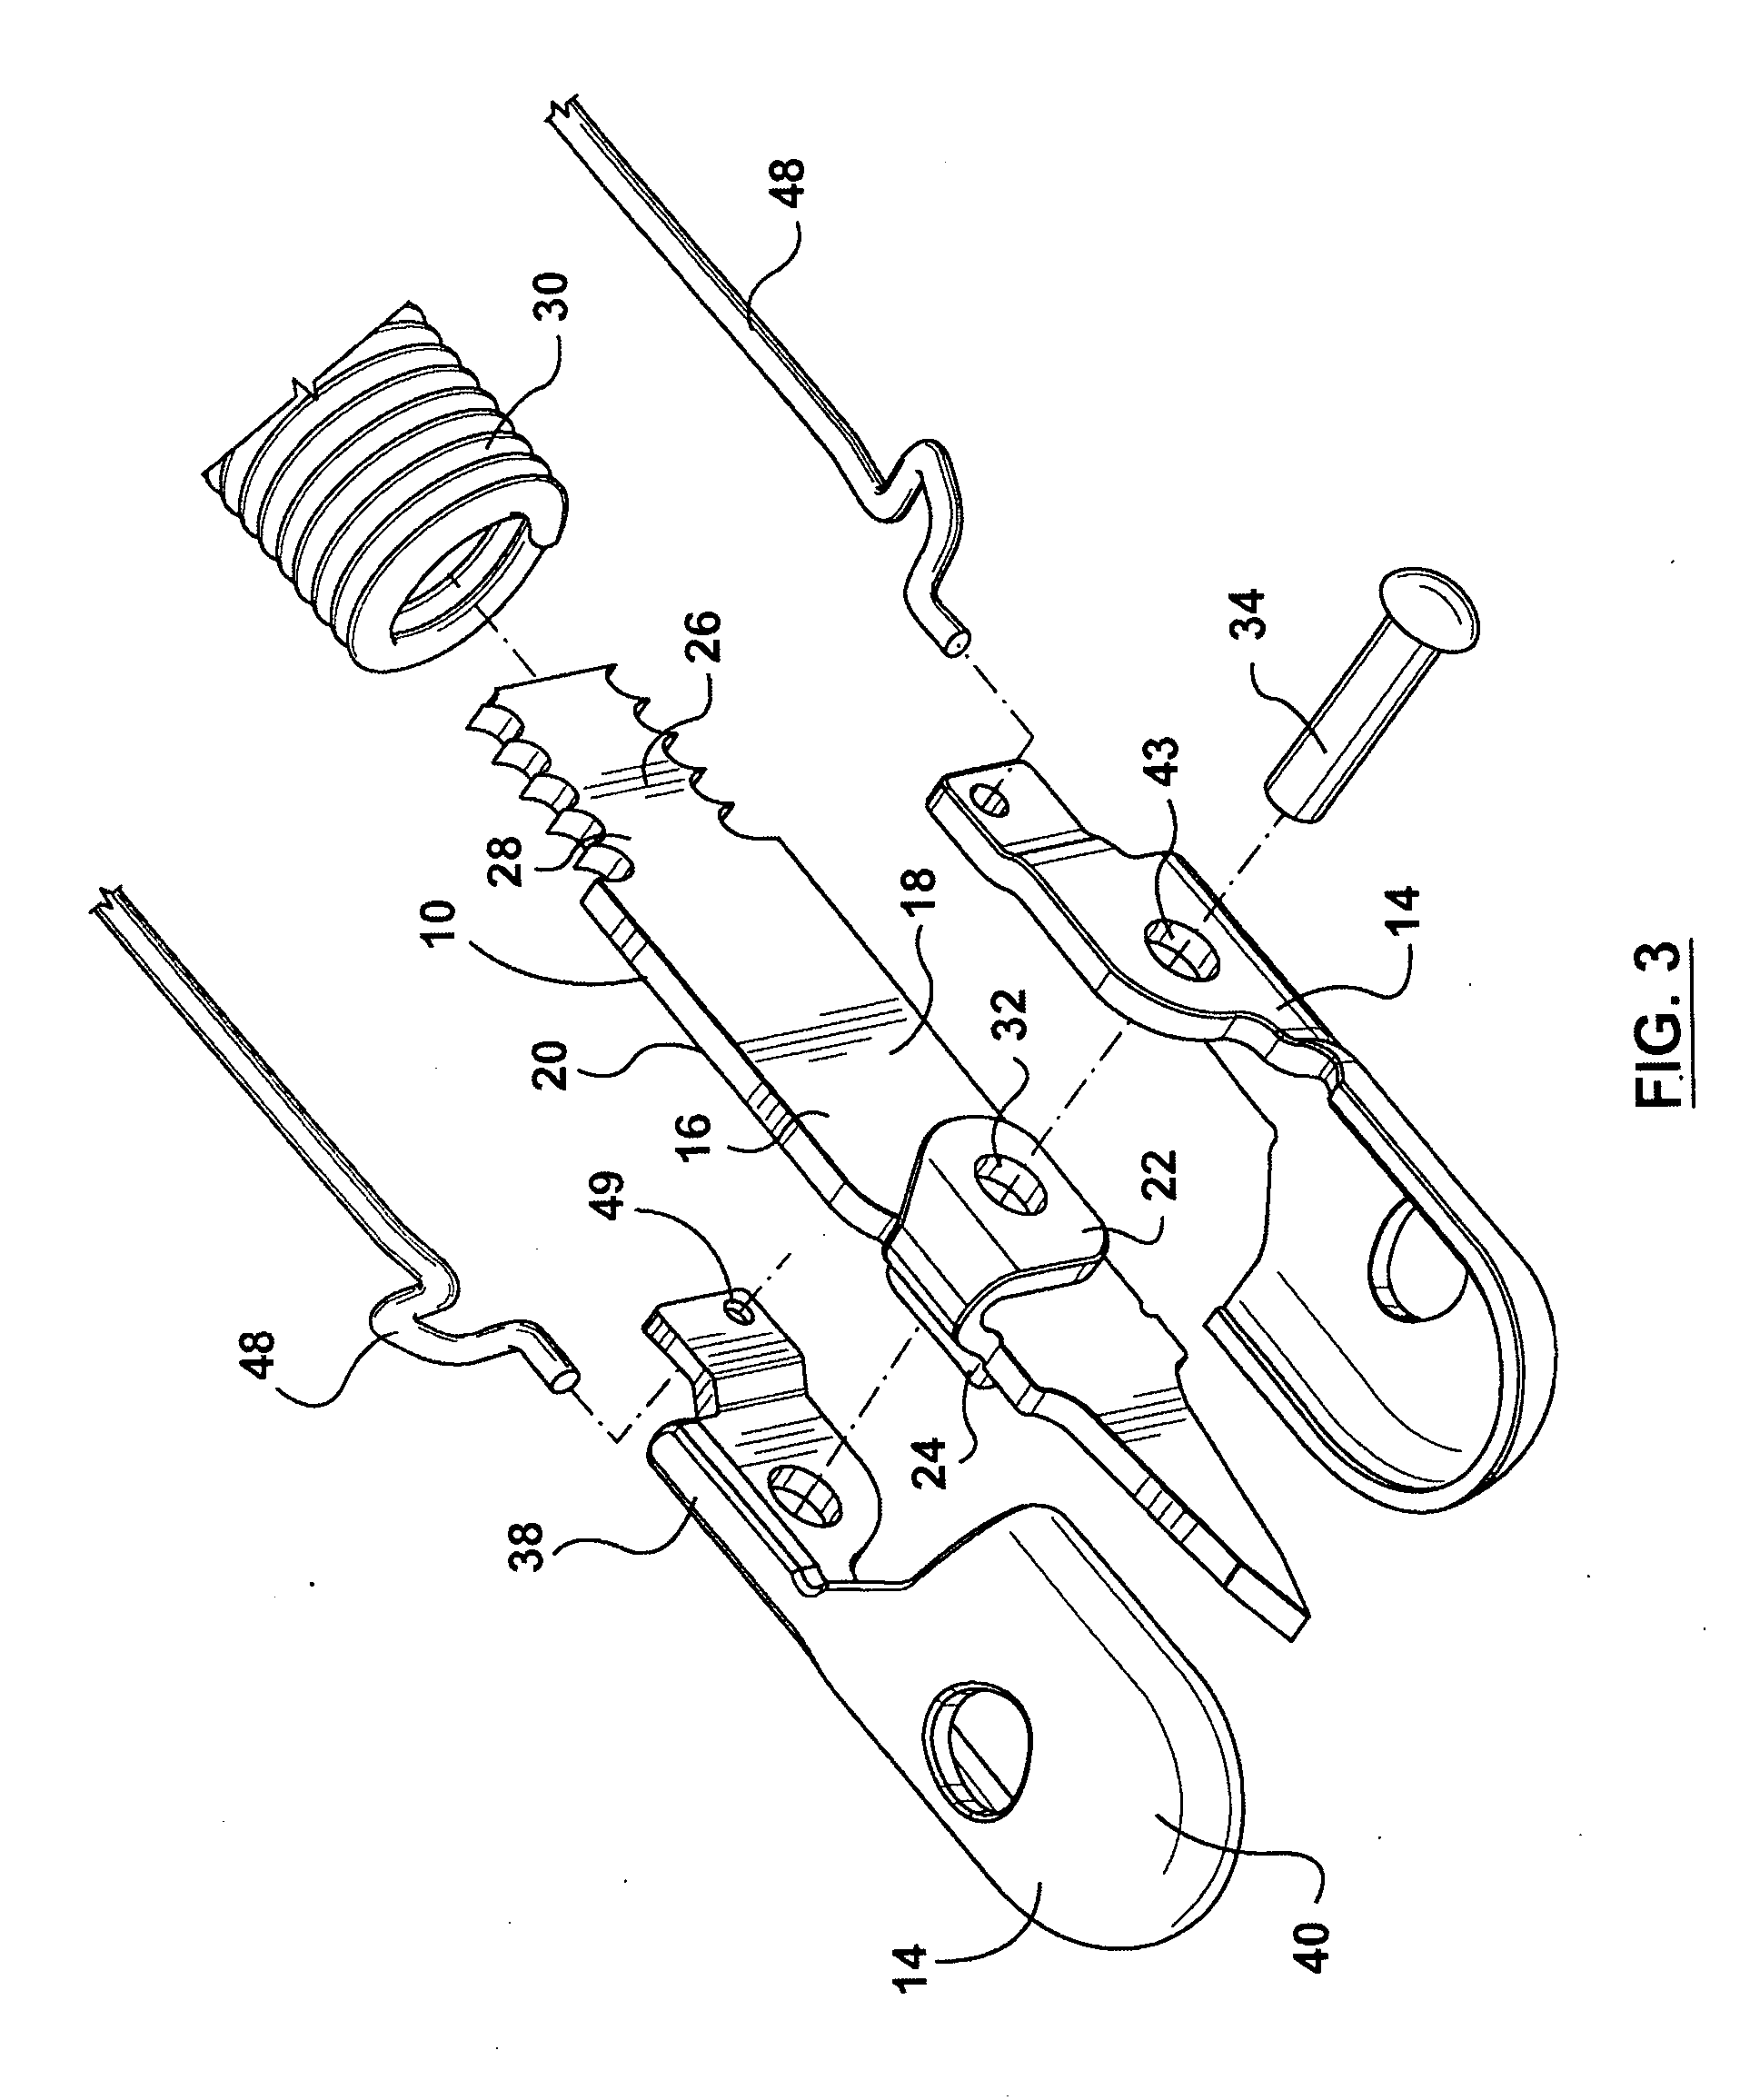 Variations of biopsy jaw and clevis and method of manufacture